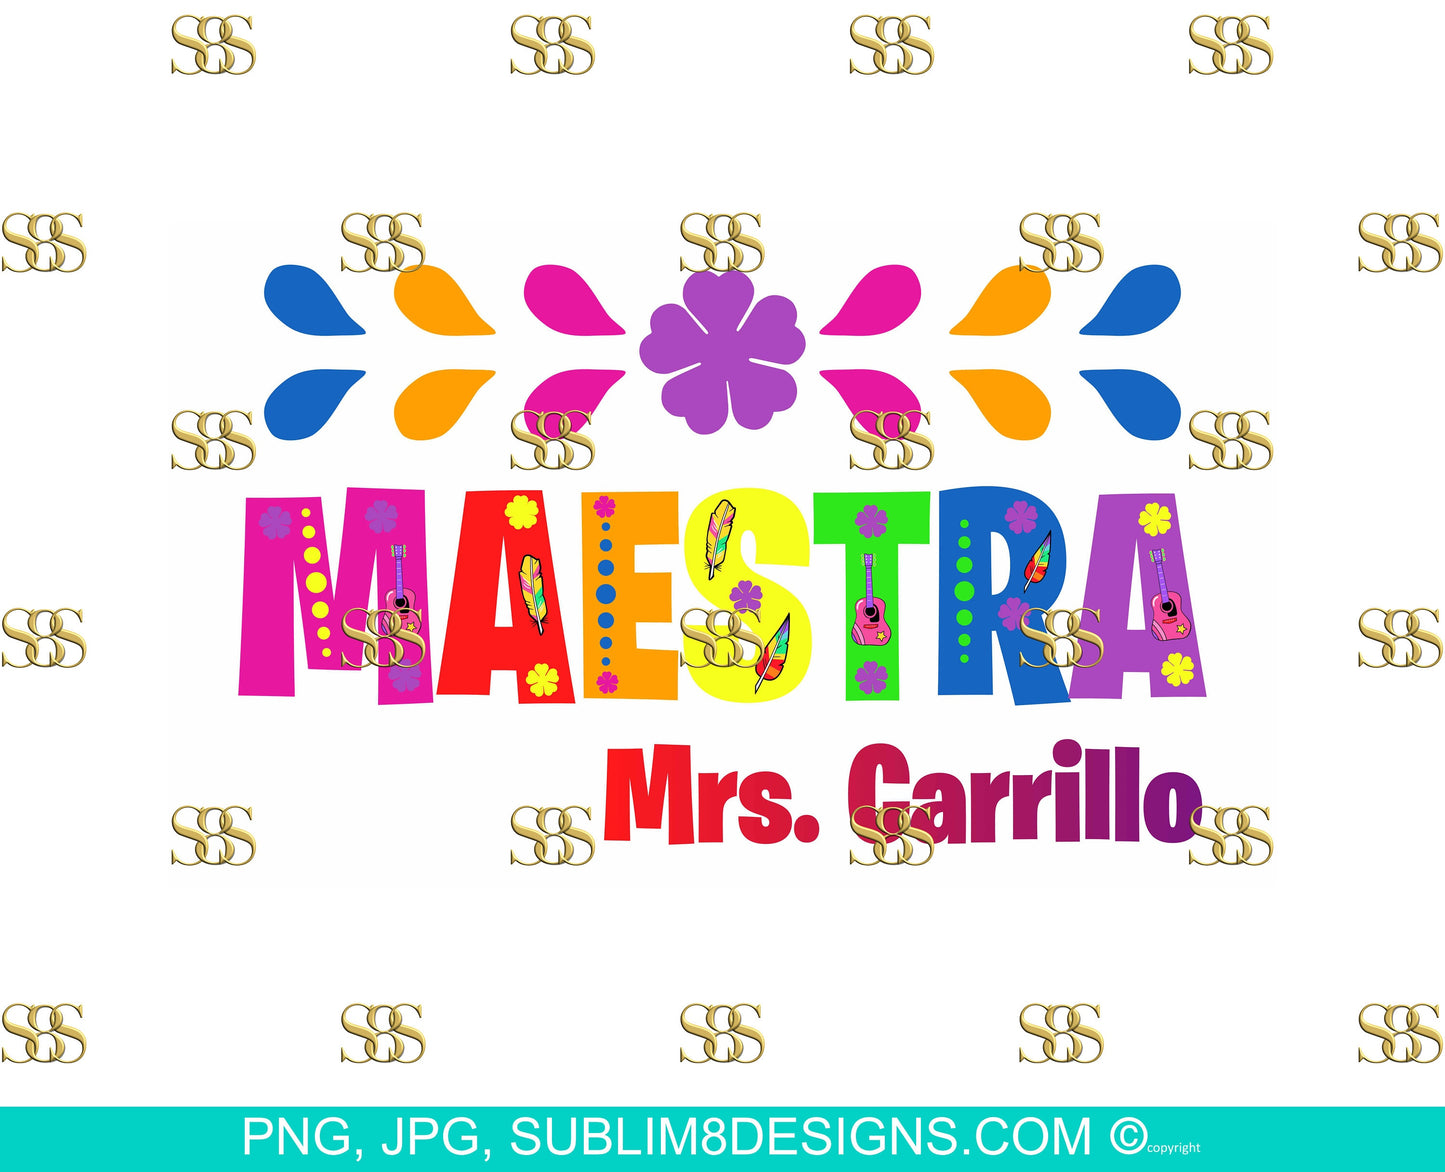 Personalized Maestro PNG and JPG ONLY